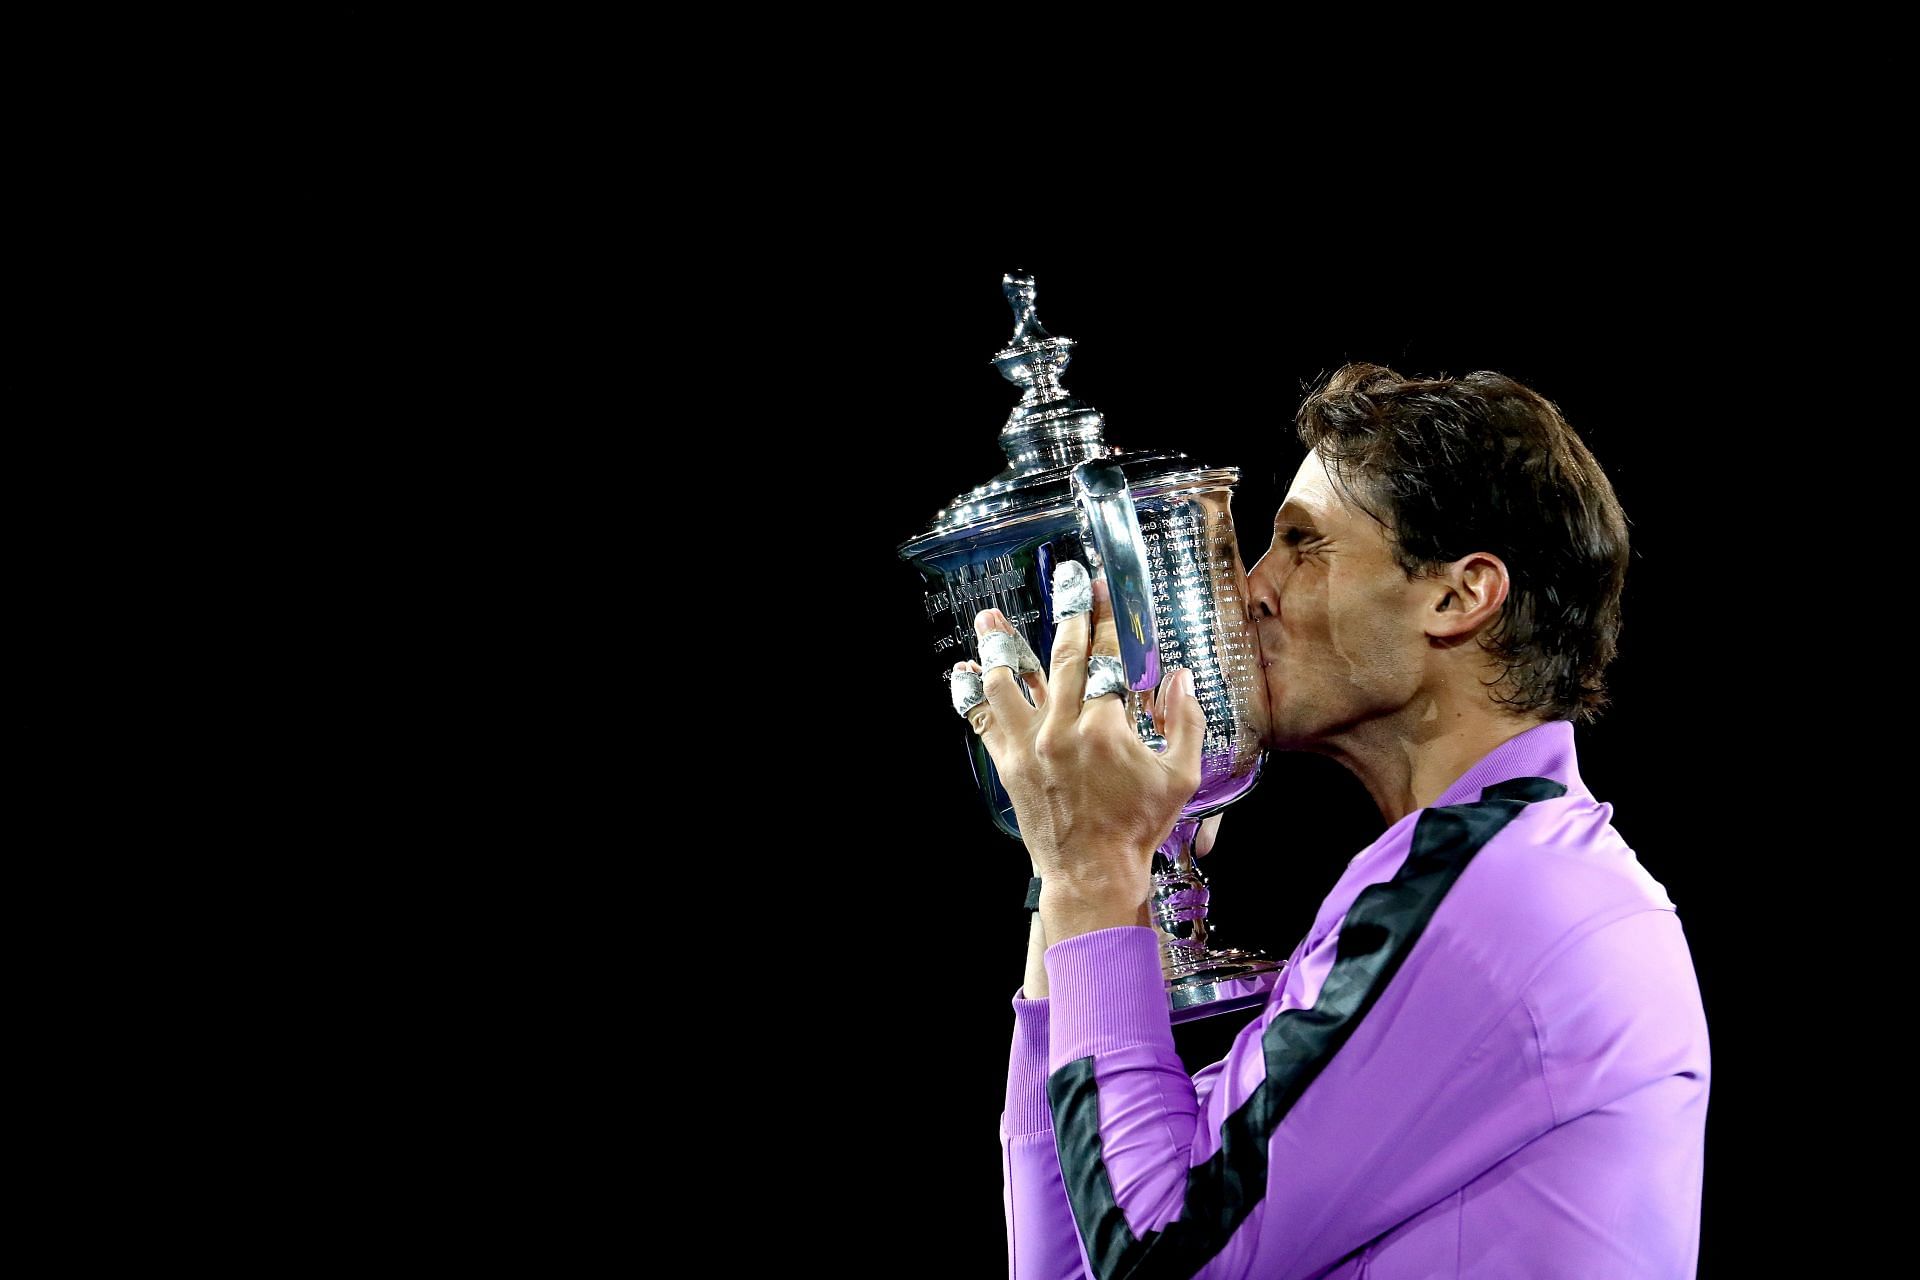 Rafael Nadal after winning the 2019 US Open.